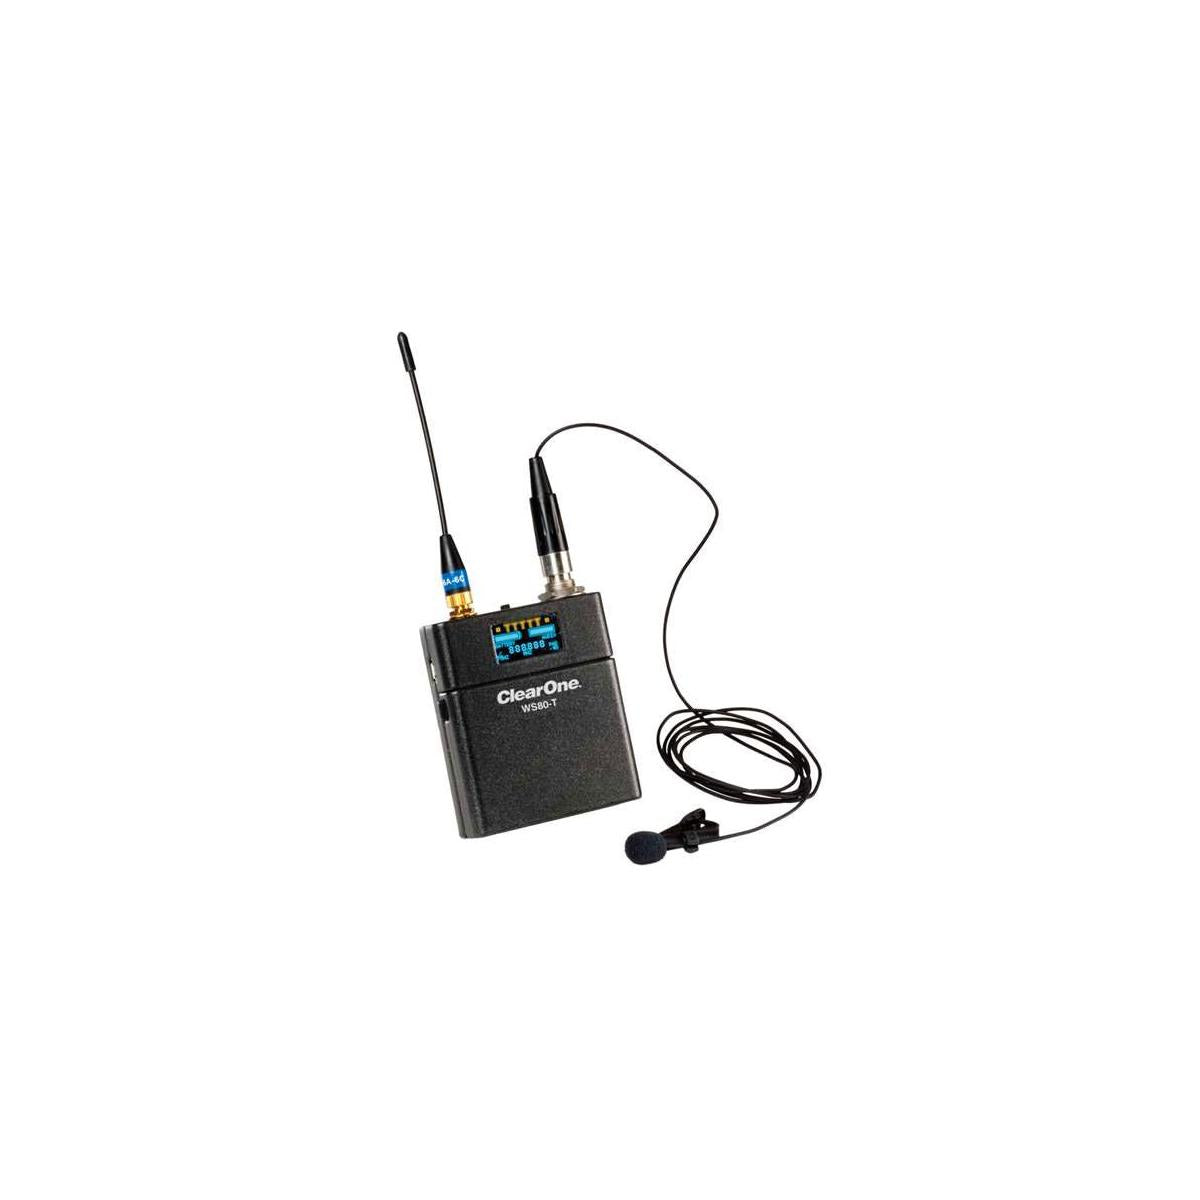 ClearOne Beltpack Transmitter - 537 MHz to 563 MHz Operating Frequency